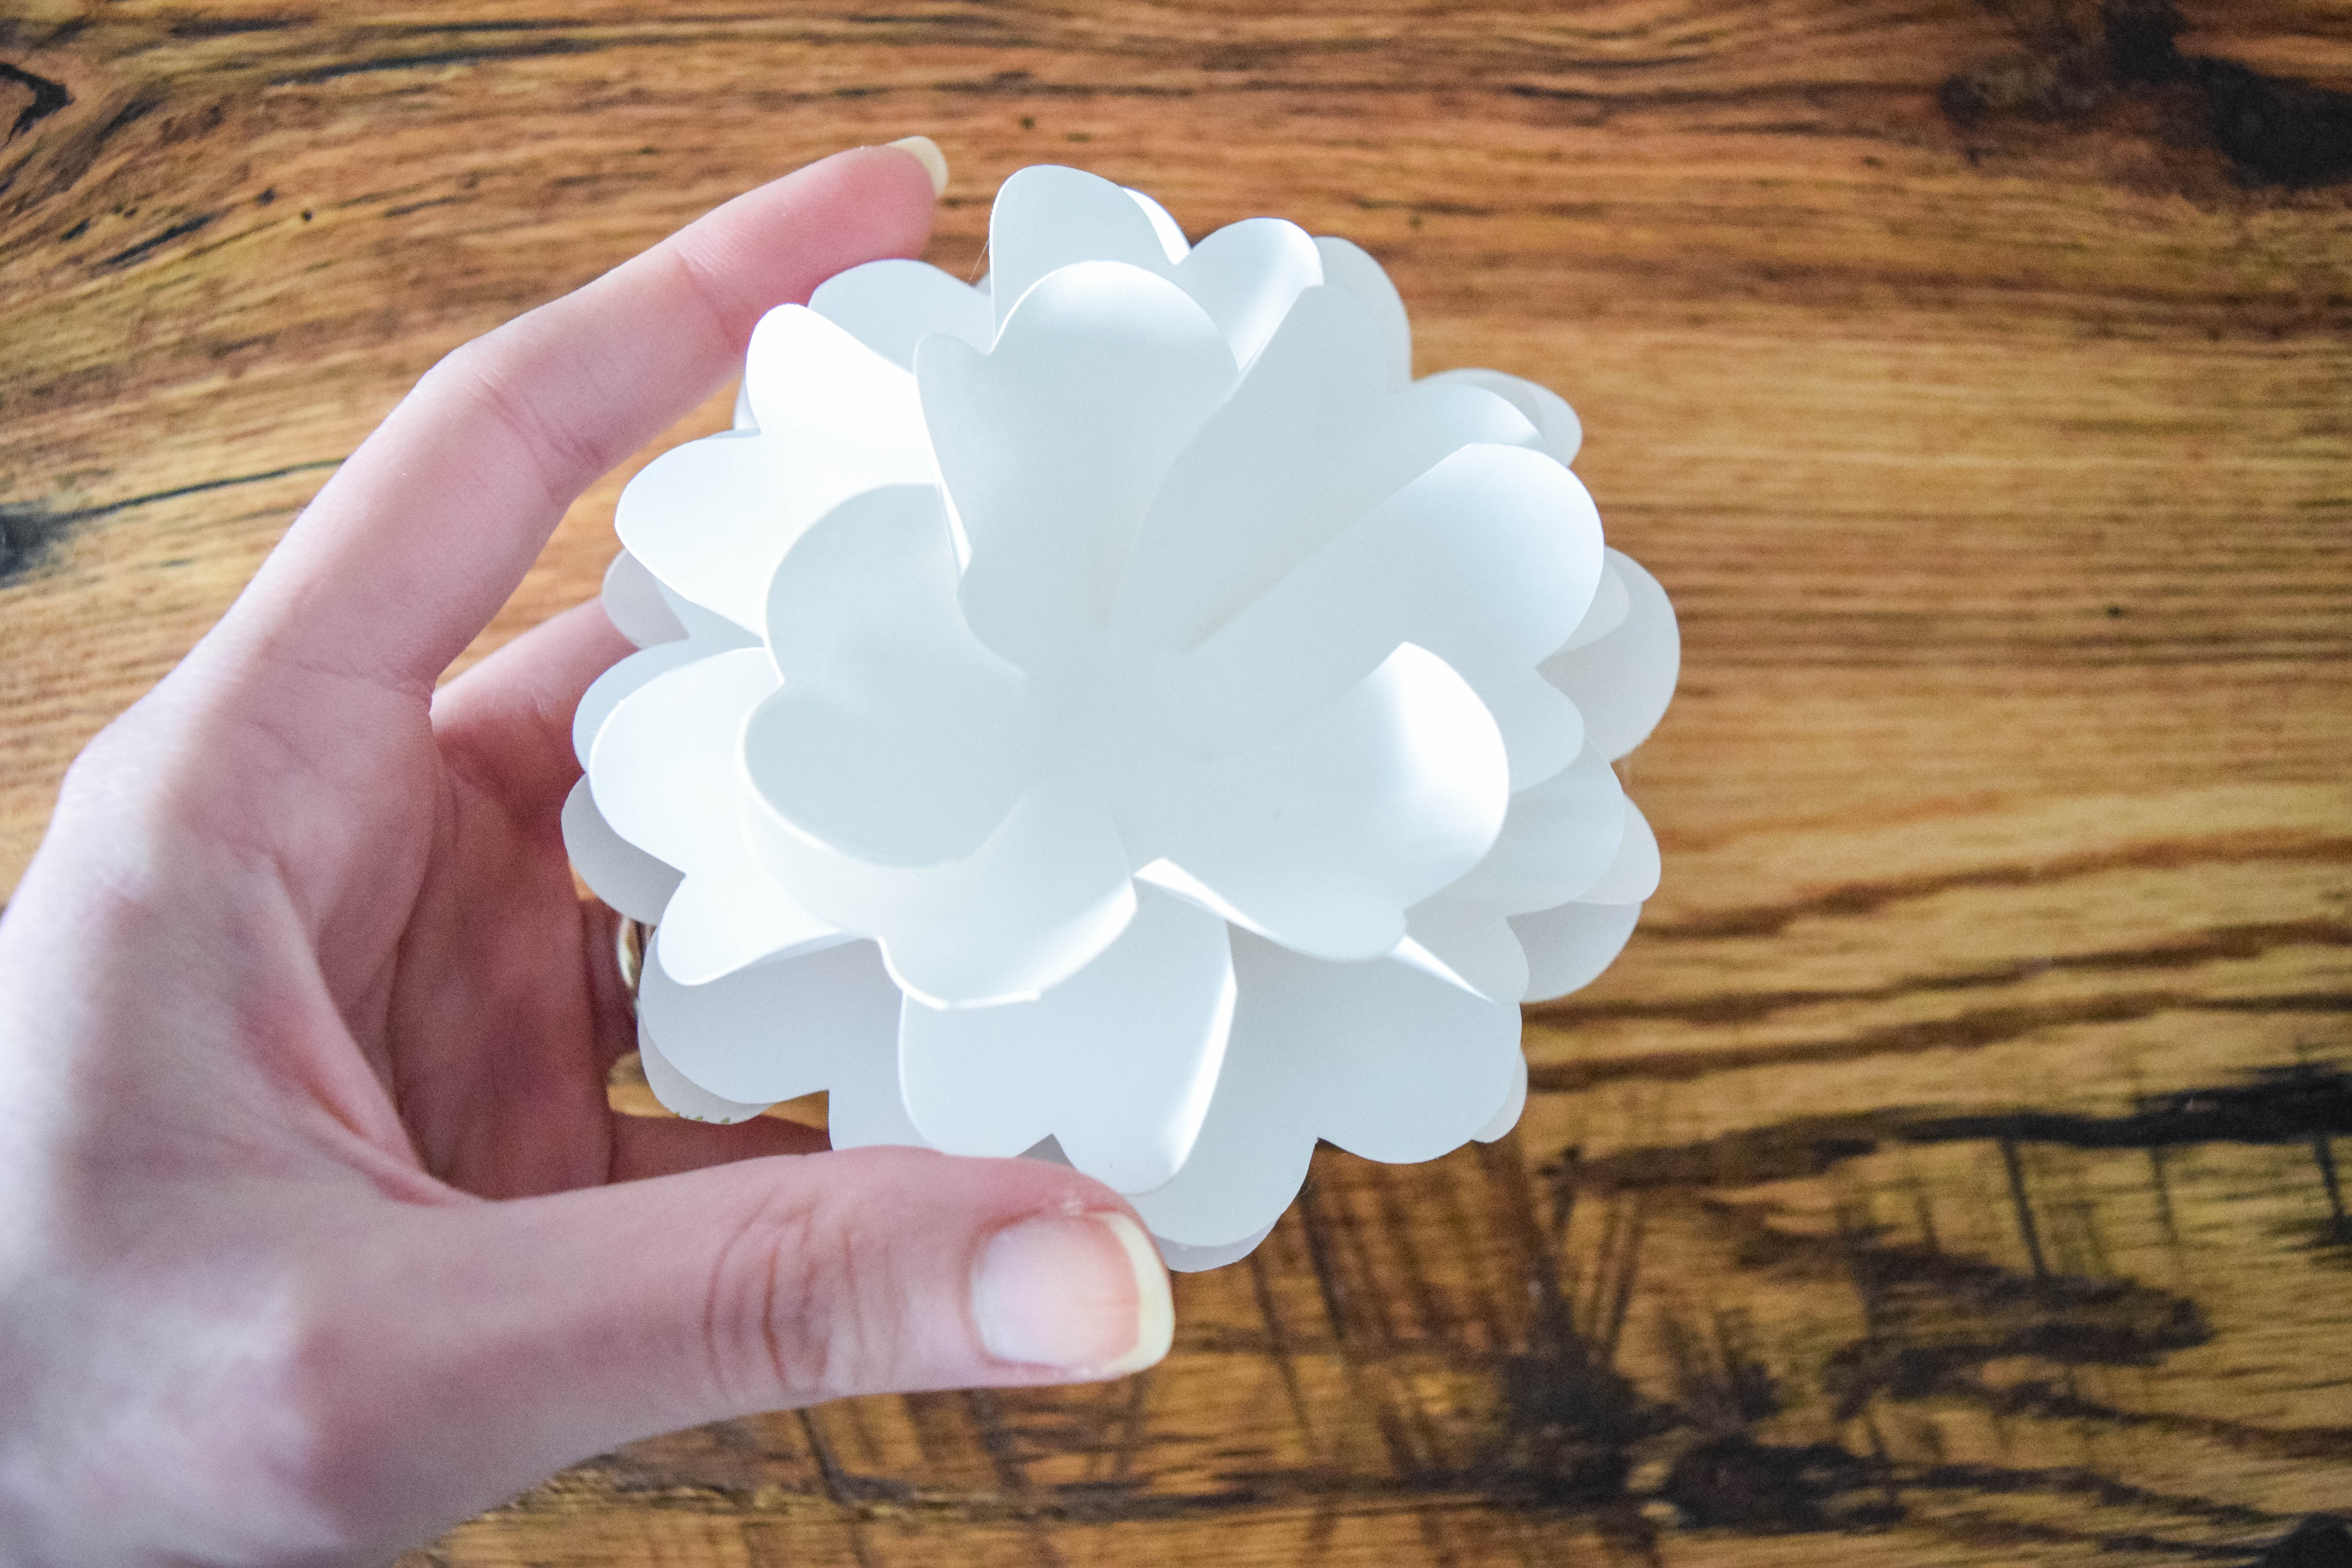 Abbi holds an almost-completed white pomander paper flower in her hands, the various layers fluttering outward.